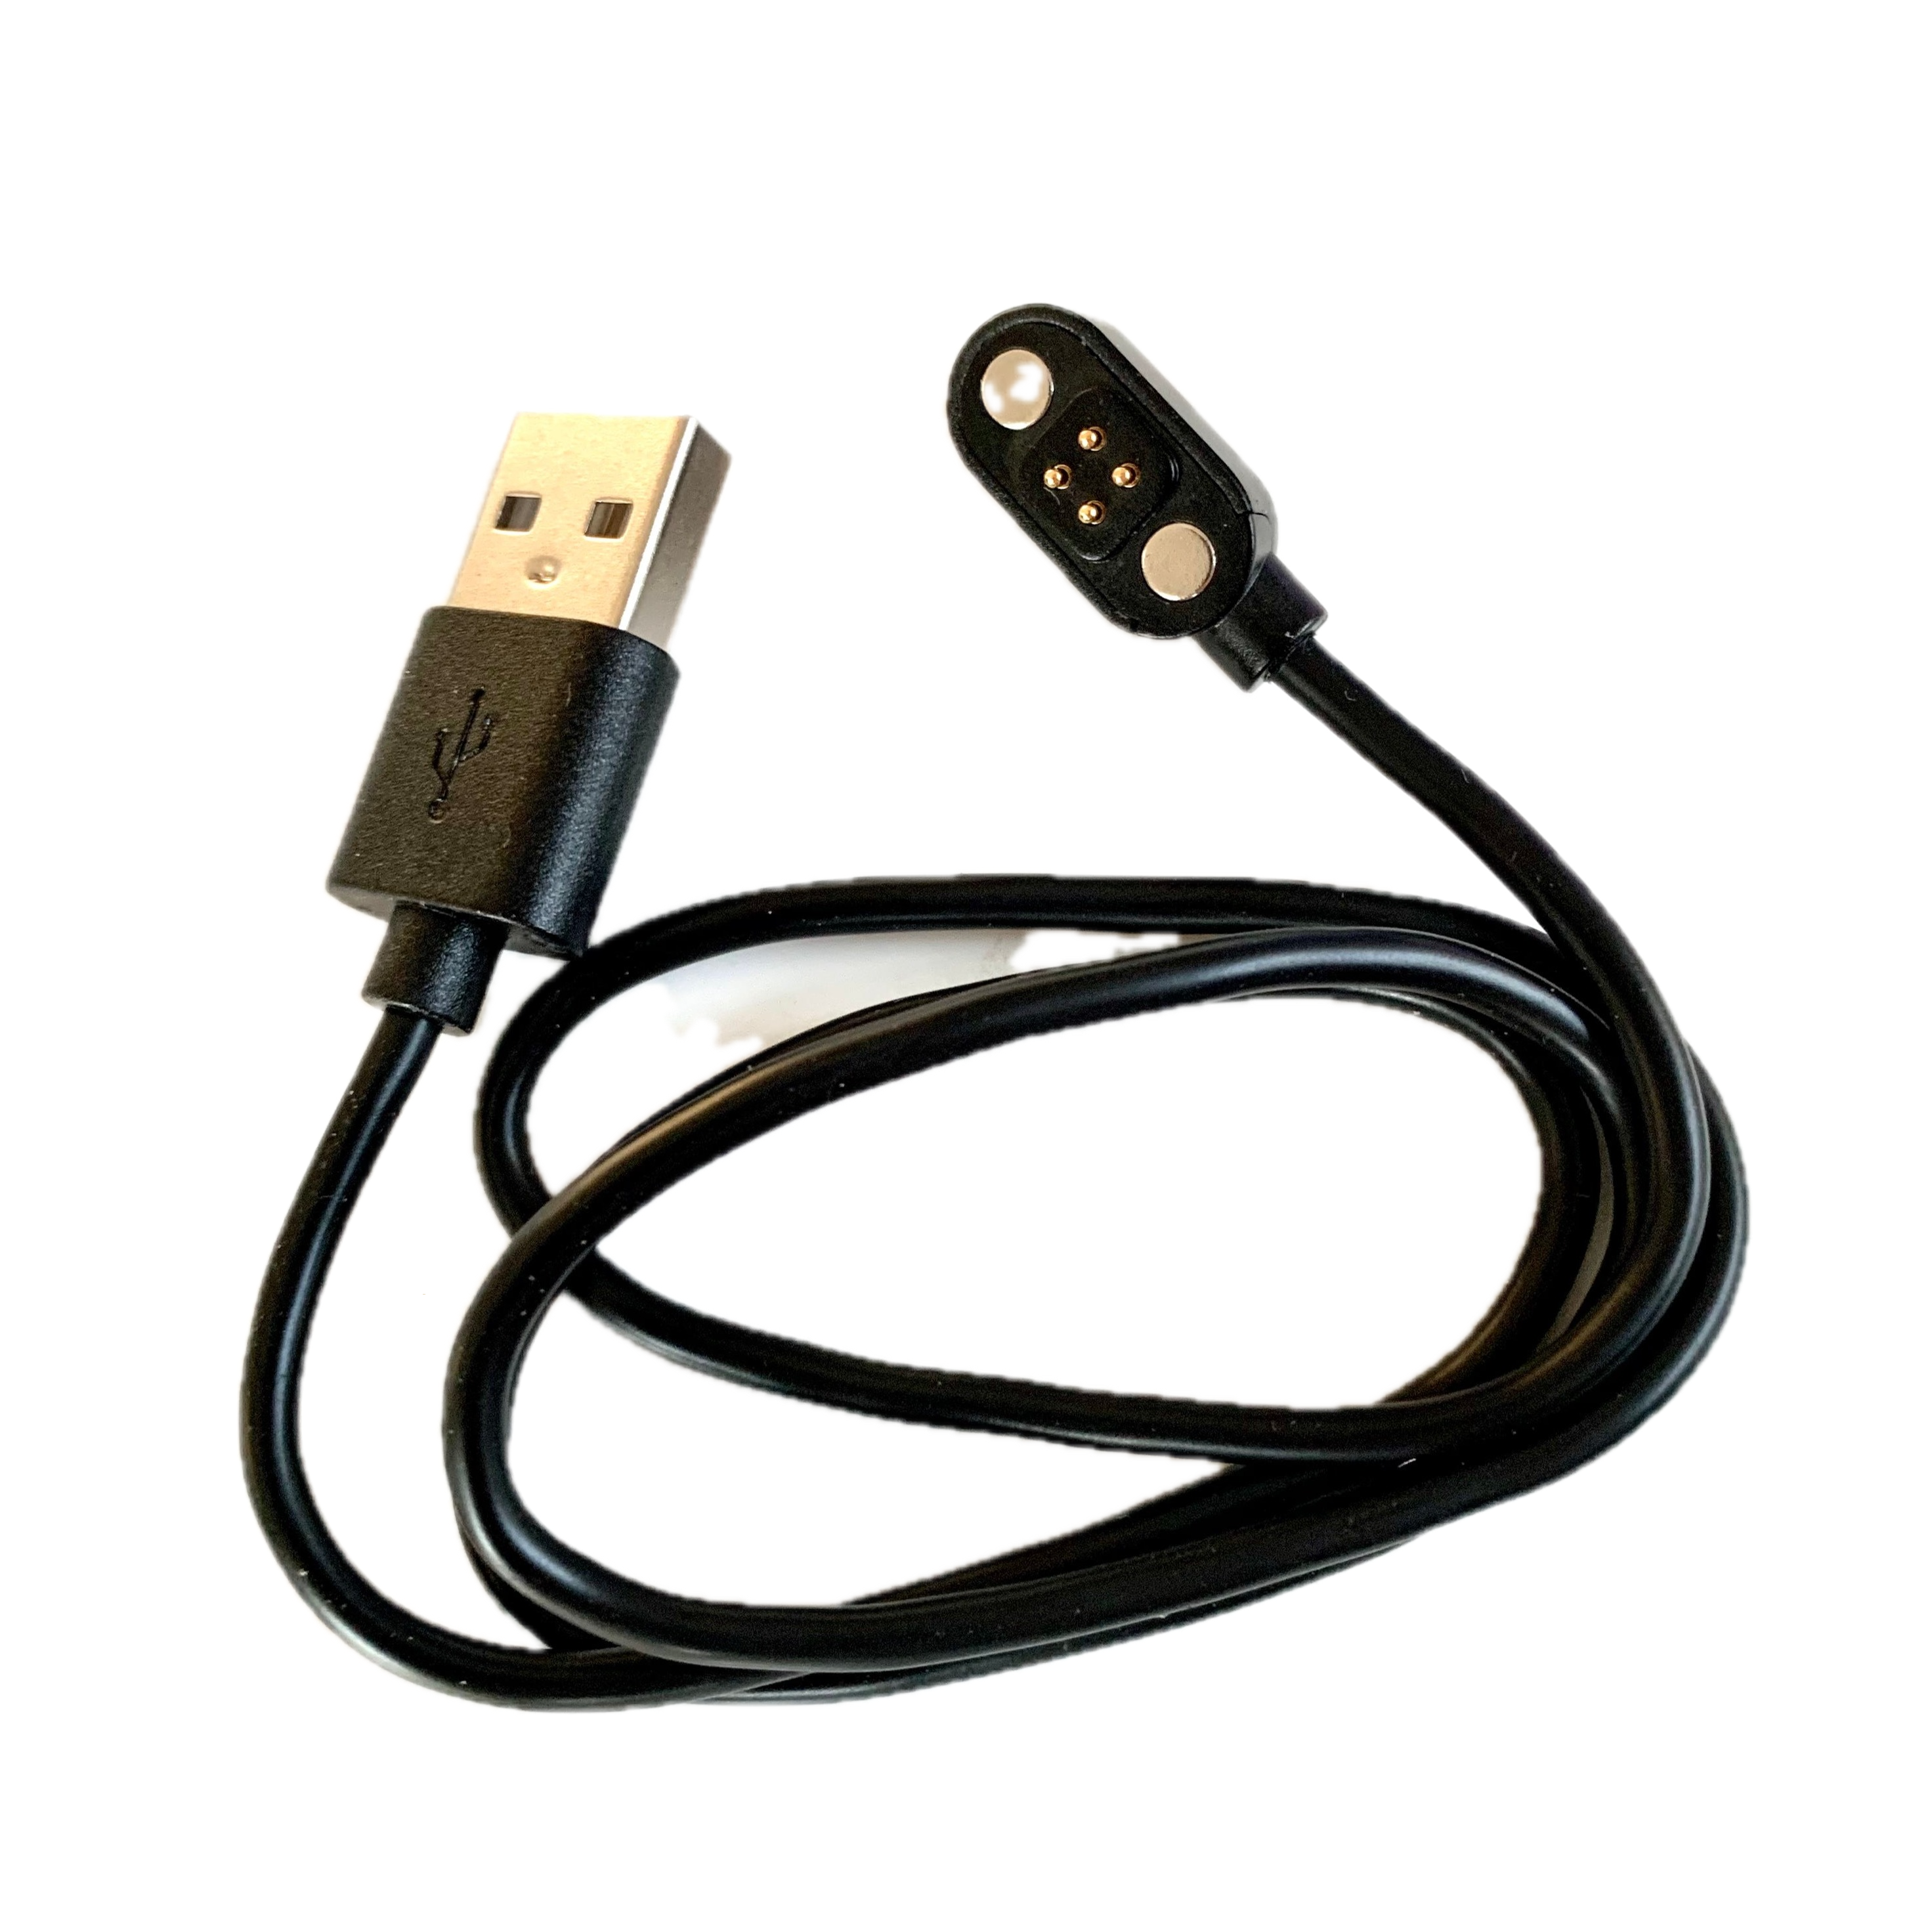 H2O TRI Multi-Sport 4-PIN USB Charging Cable (ONLY)